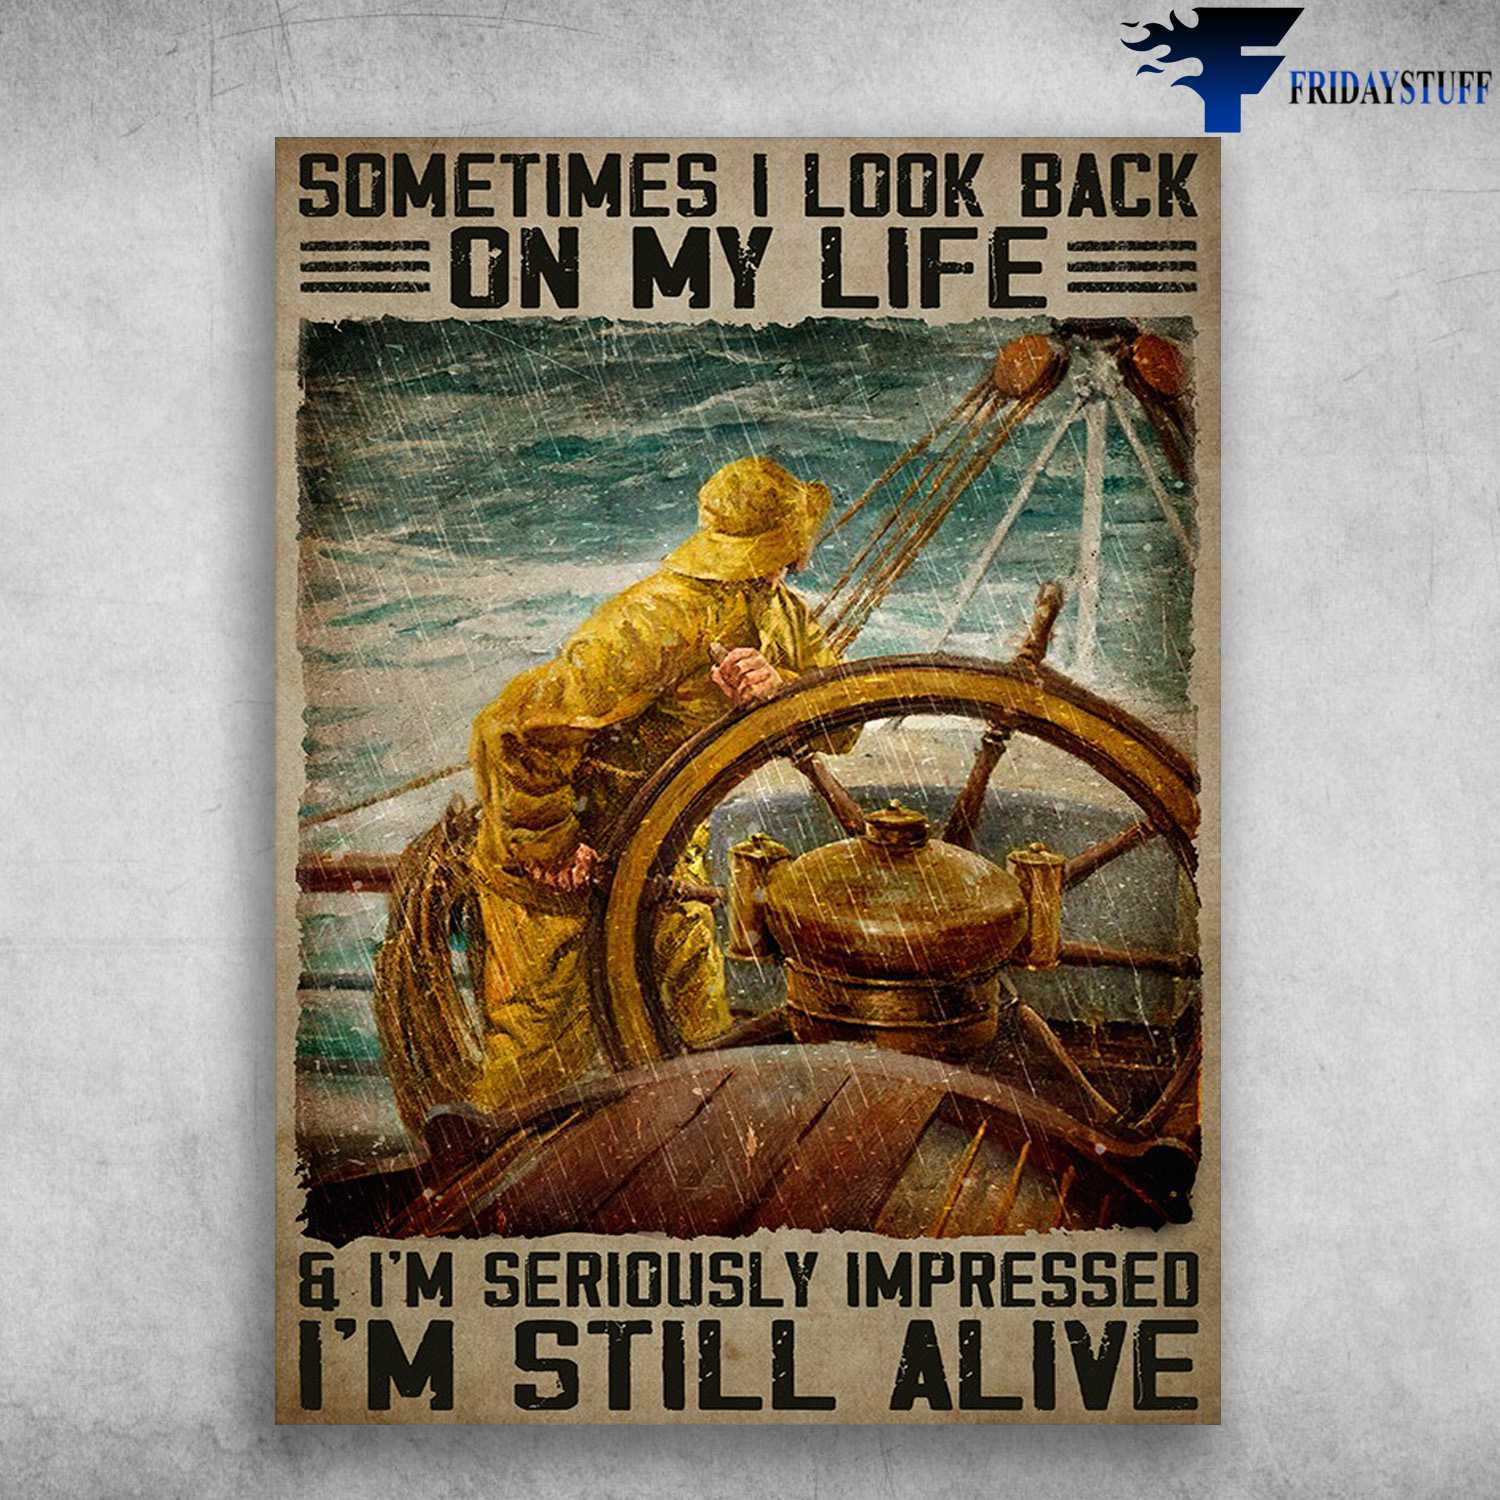 Sailor In Storm, Sailboat Poster - Sometimes I Look Back On Life, And I'm Seriously Impressed, I'm Still Alive